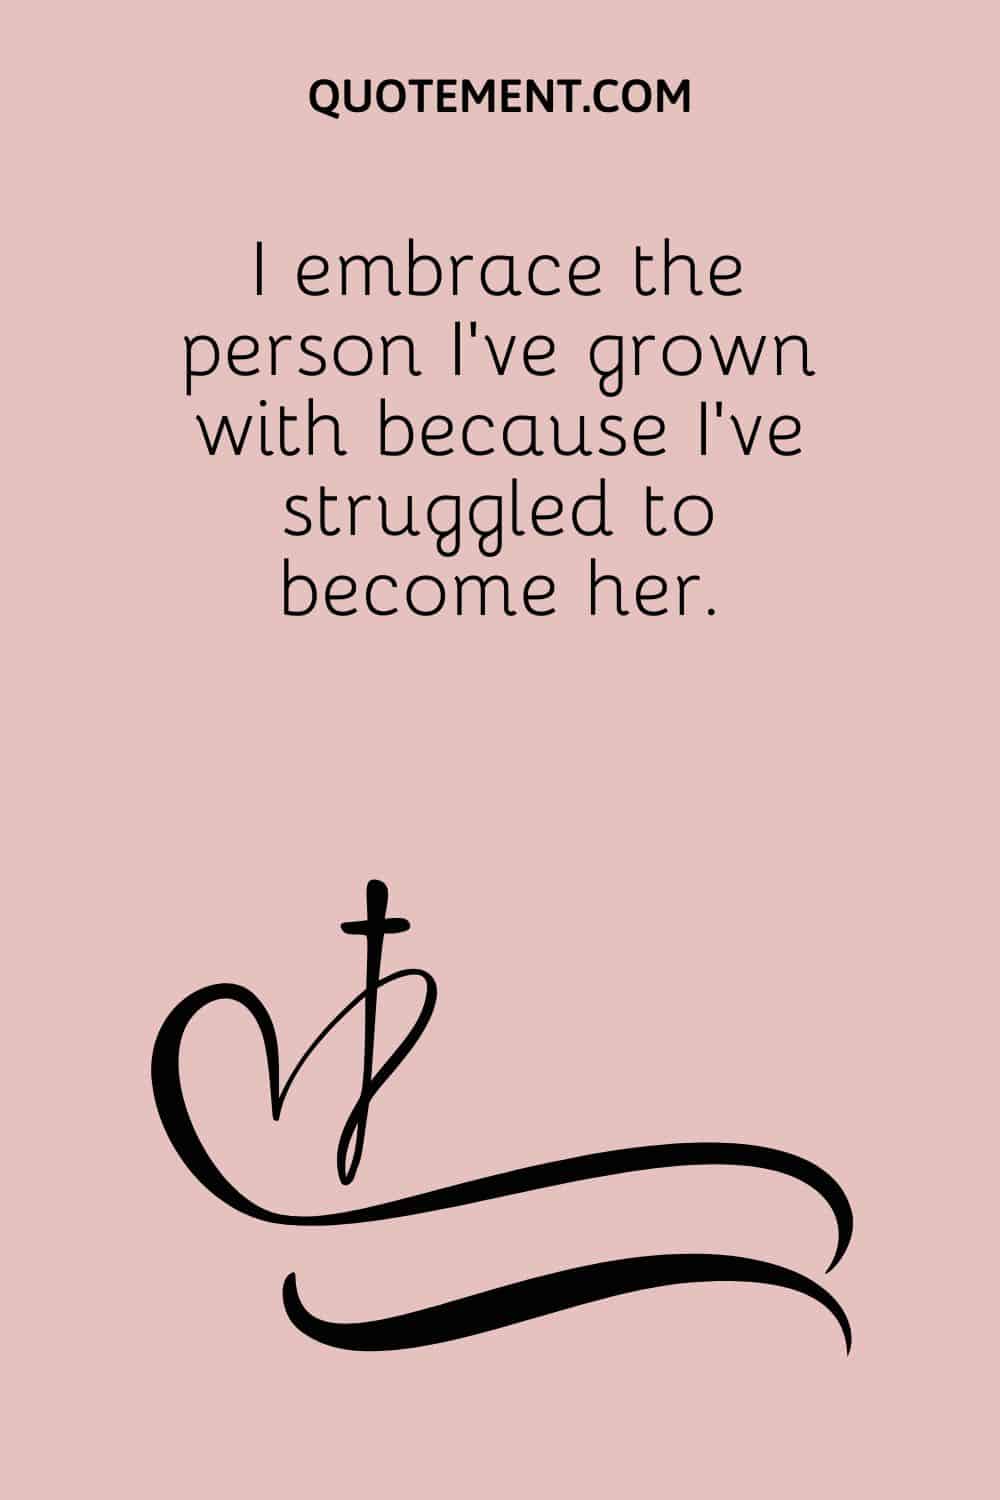 I embrace the person I’ve grown with because I’ve struggled to become her